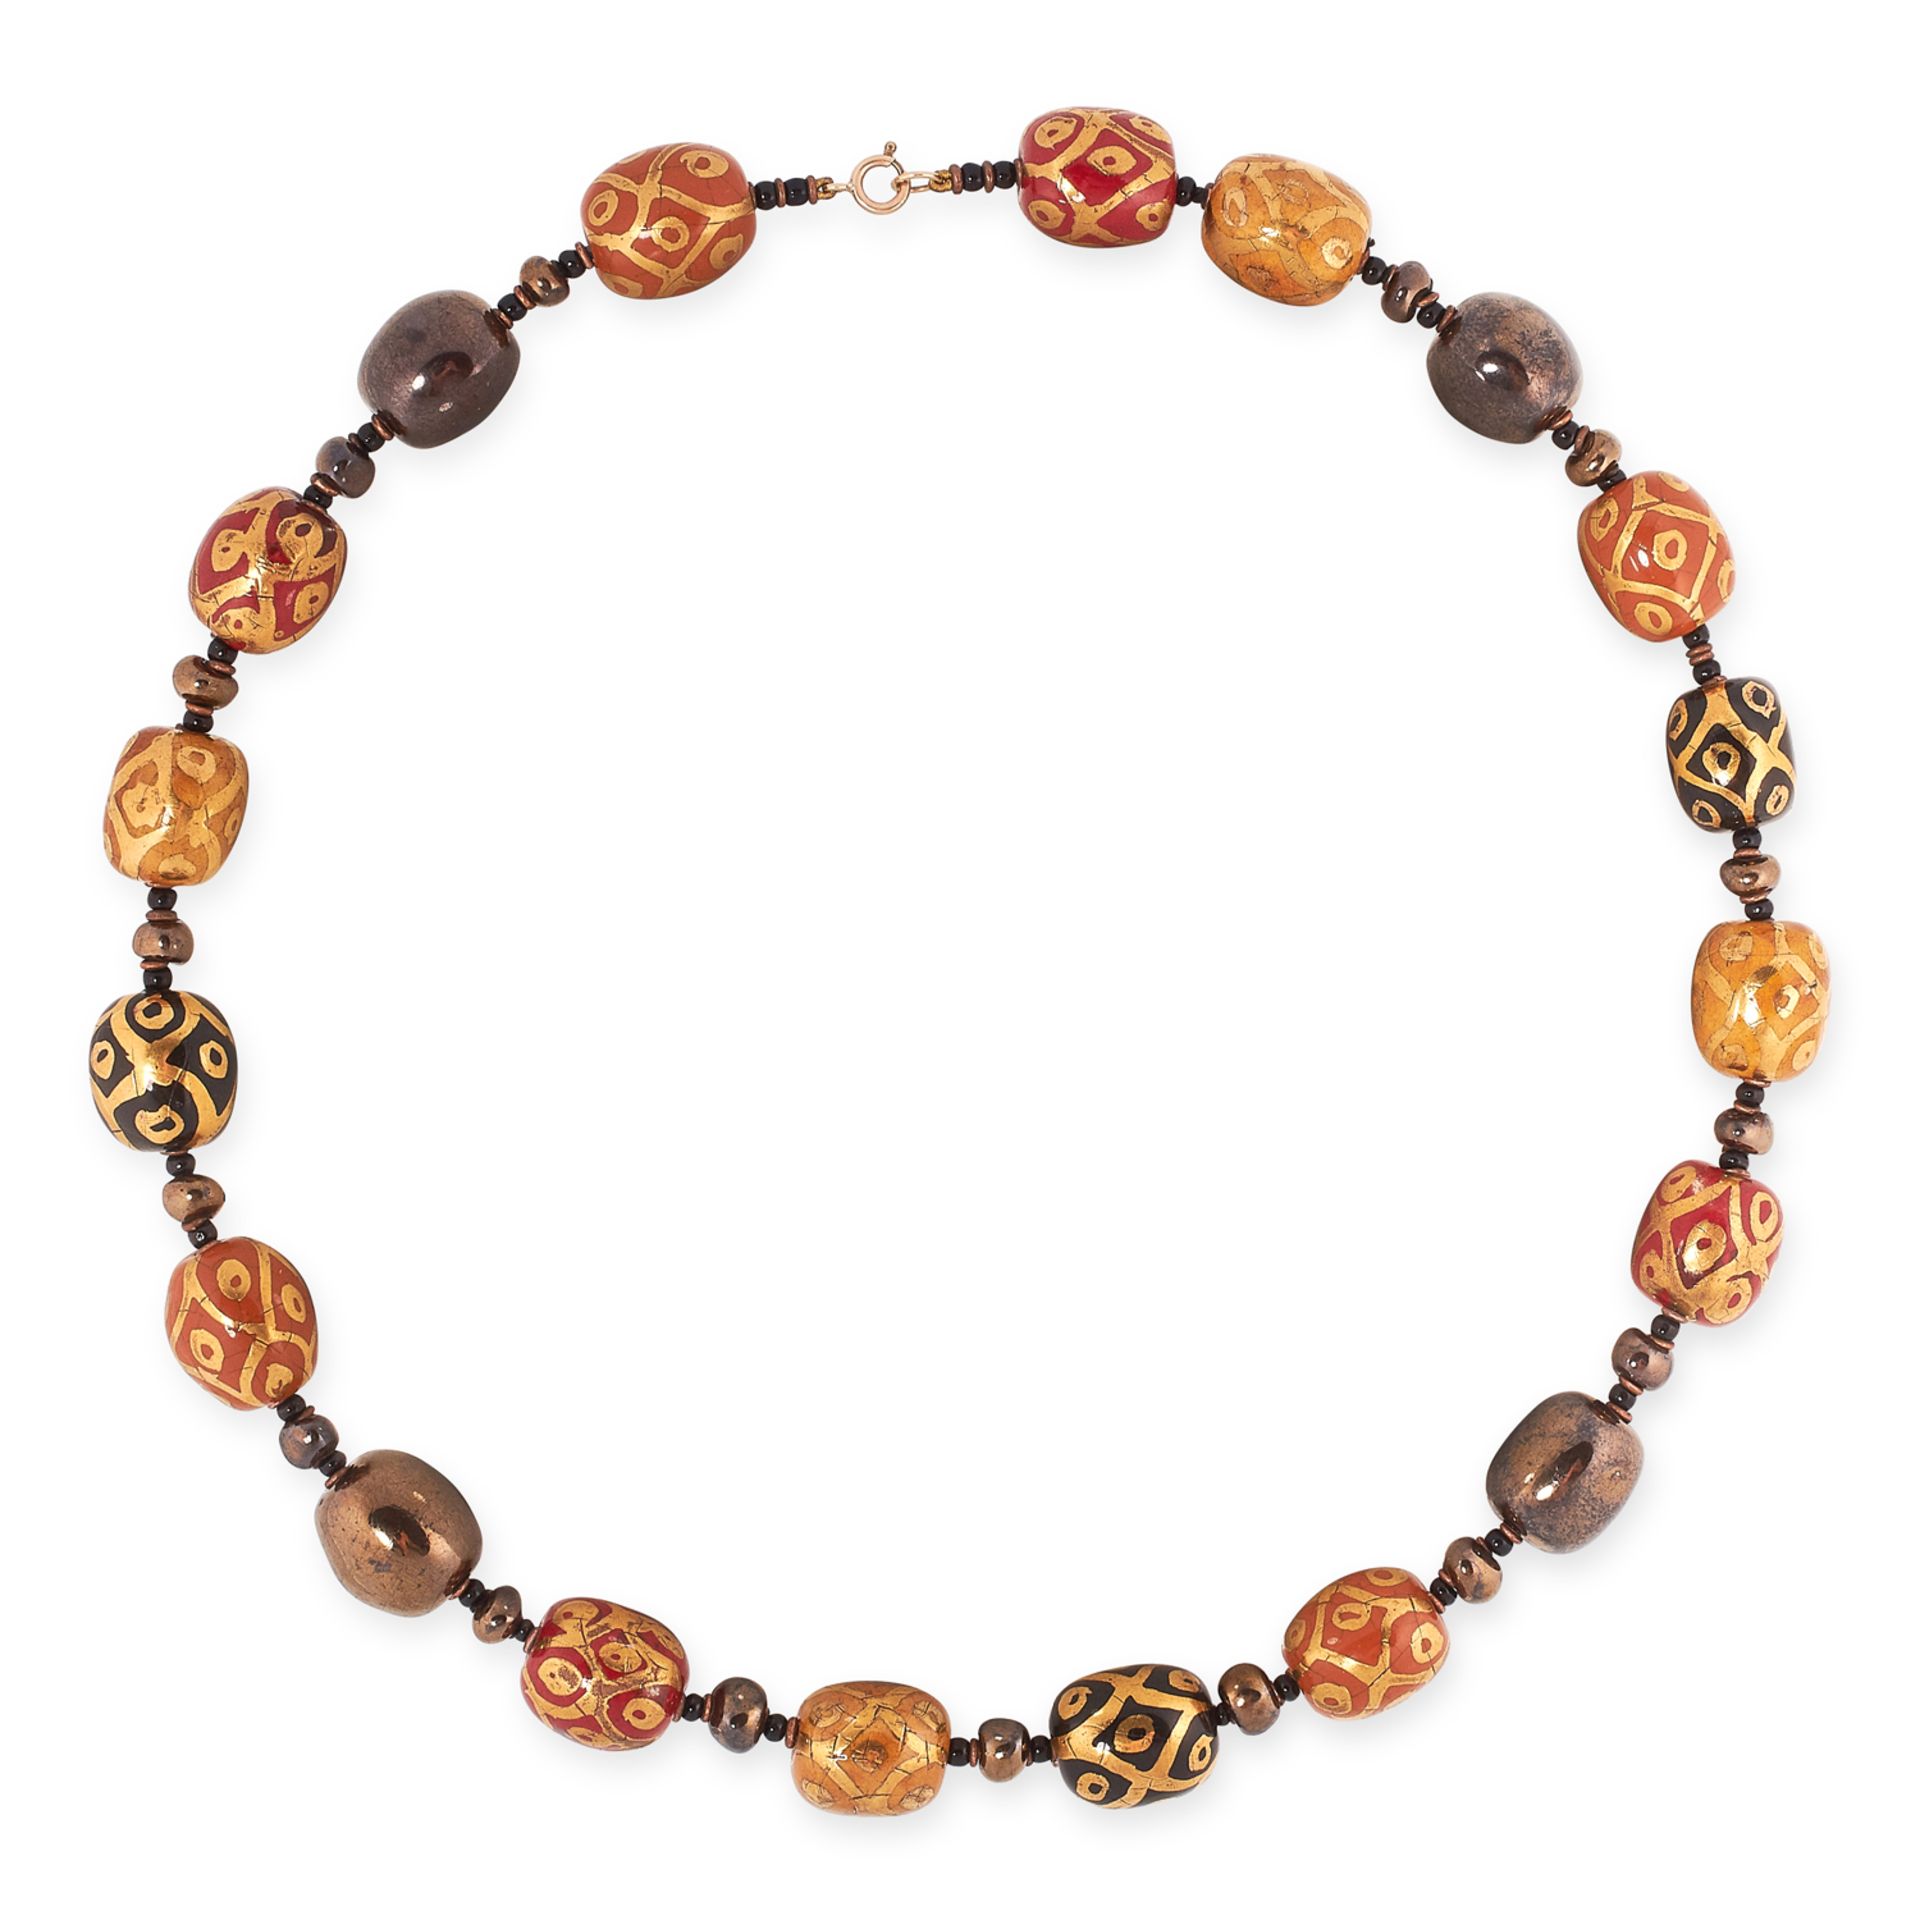 PAINTED WOODEN BEAD NECKLACE comprising of a single row of painted beads, 56cm, 110.1g.